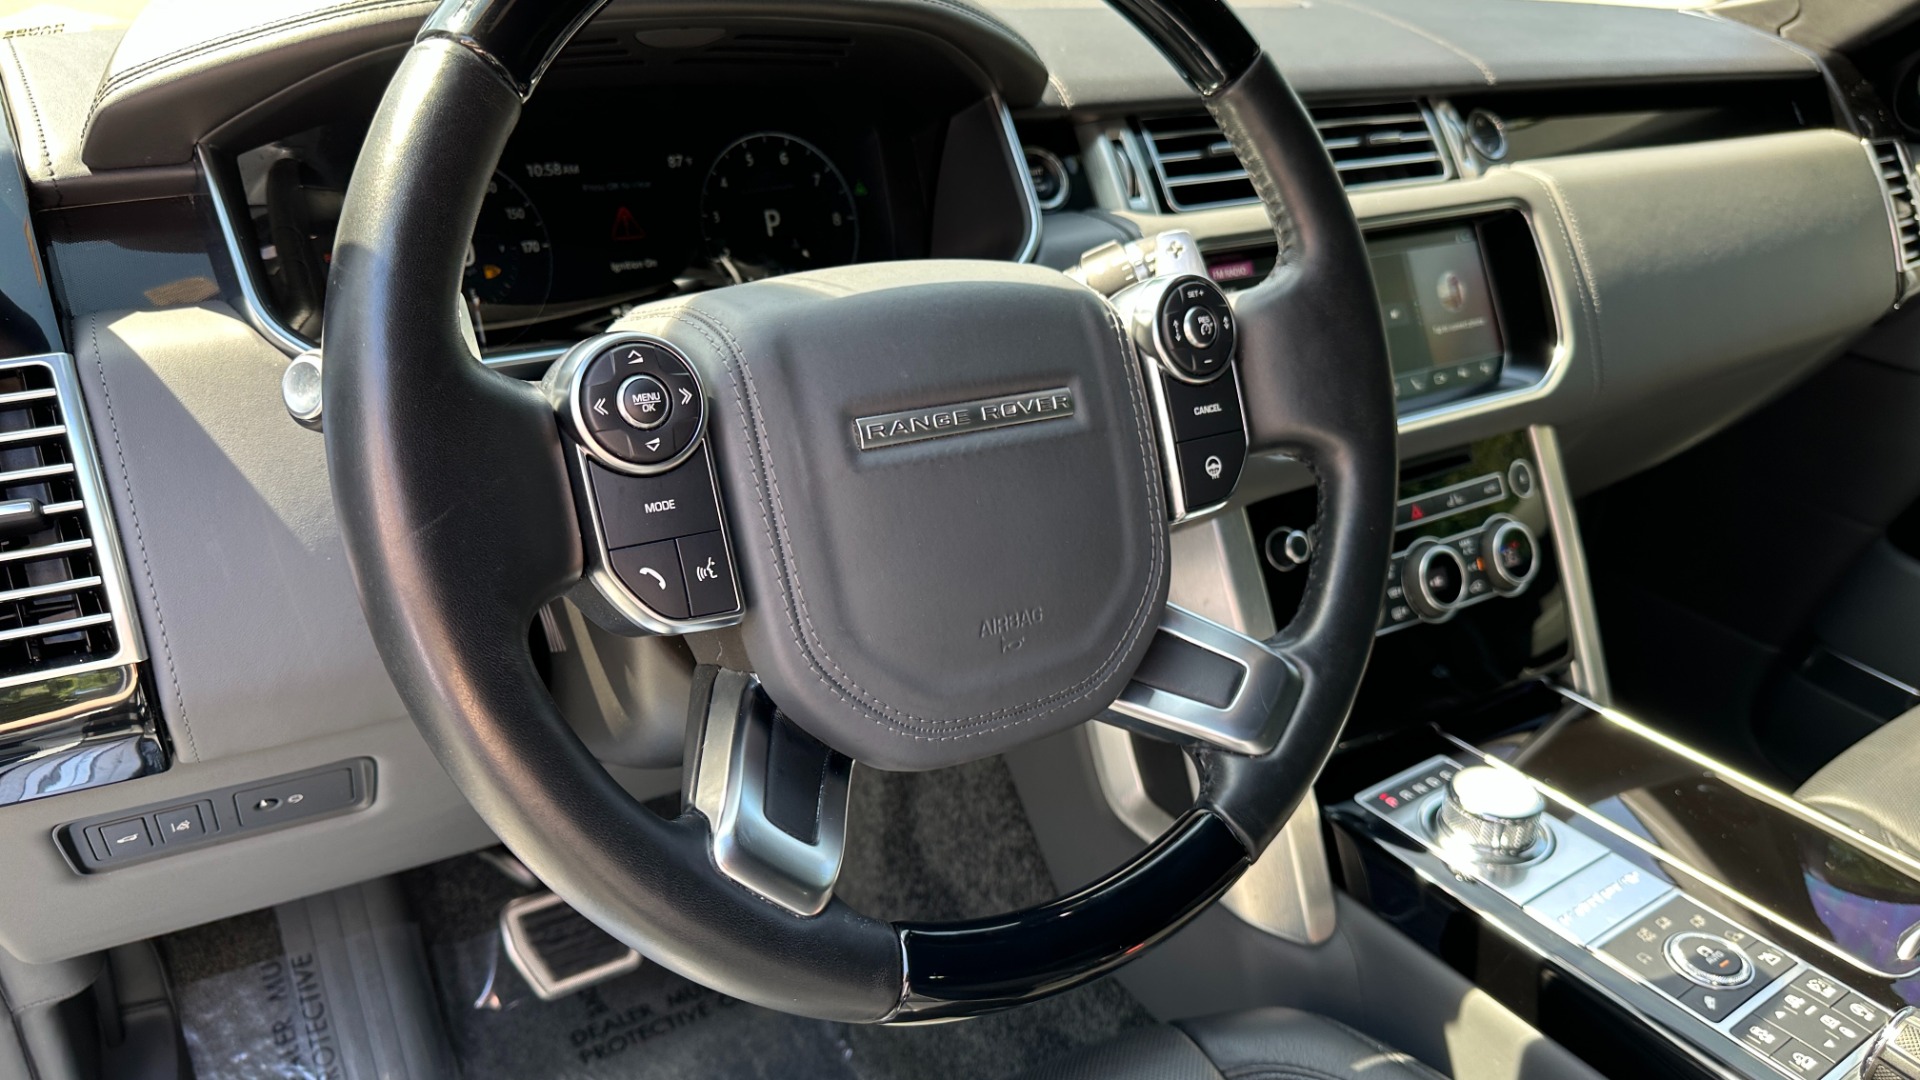 Used 2017 Land Rover Range Rover SV AUTOBIOGRAPHY / LOADED / REAR MASSAGE / EXECUTIVE SEATING / LWB for sale $75,900 at Formula Imports in Charlotte NC 28227 14